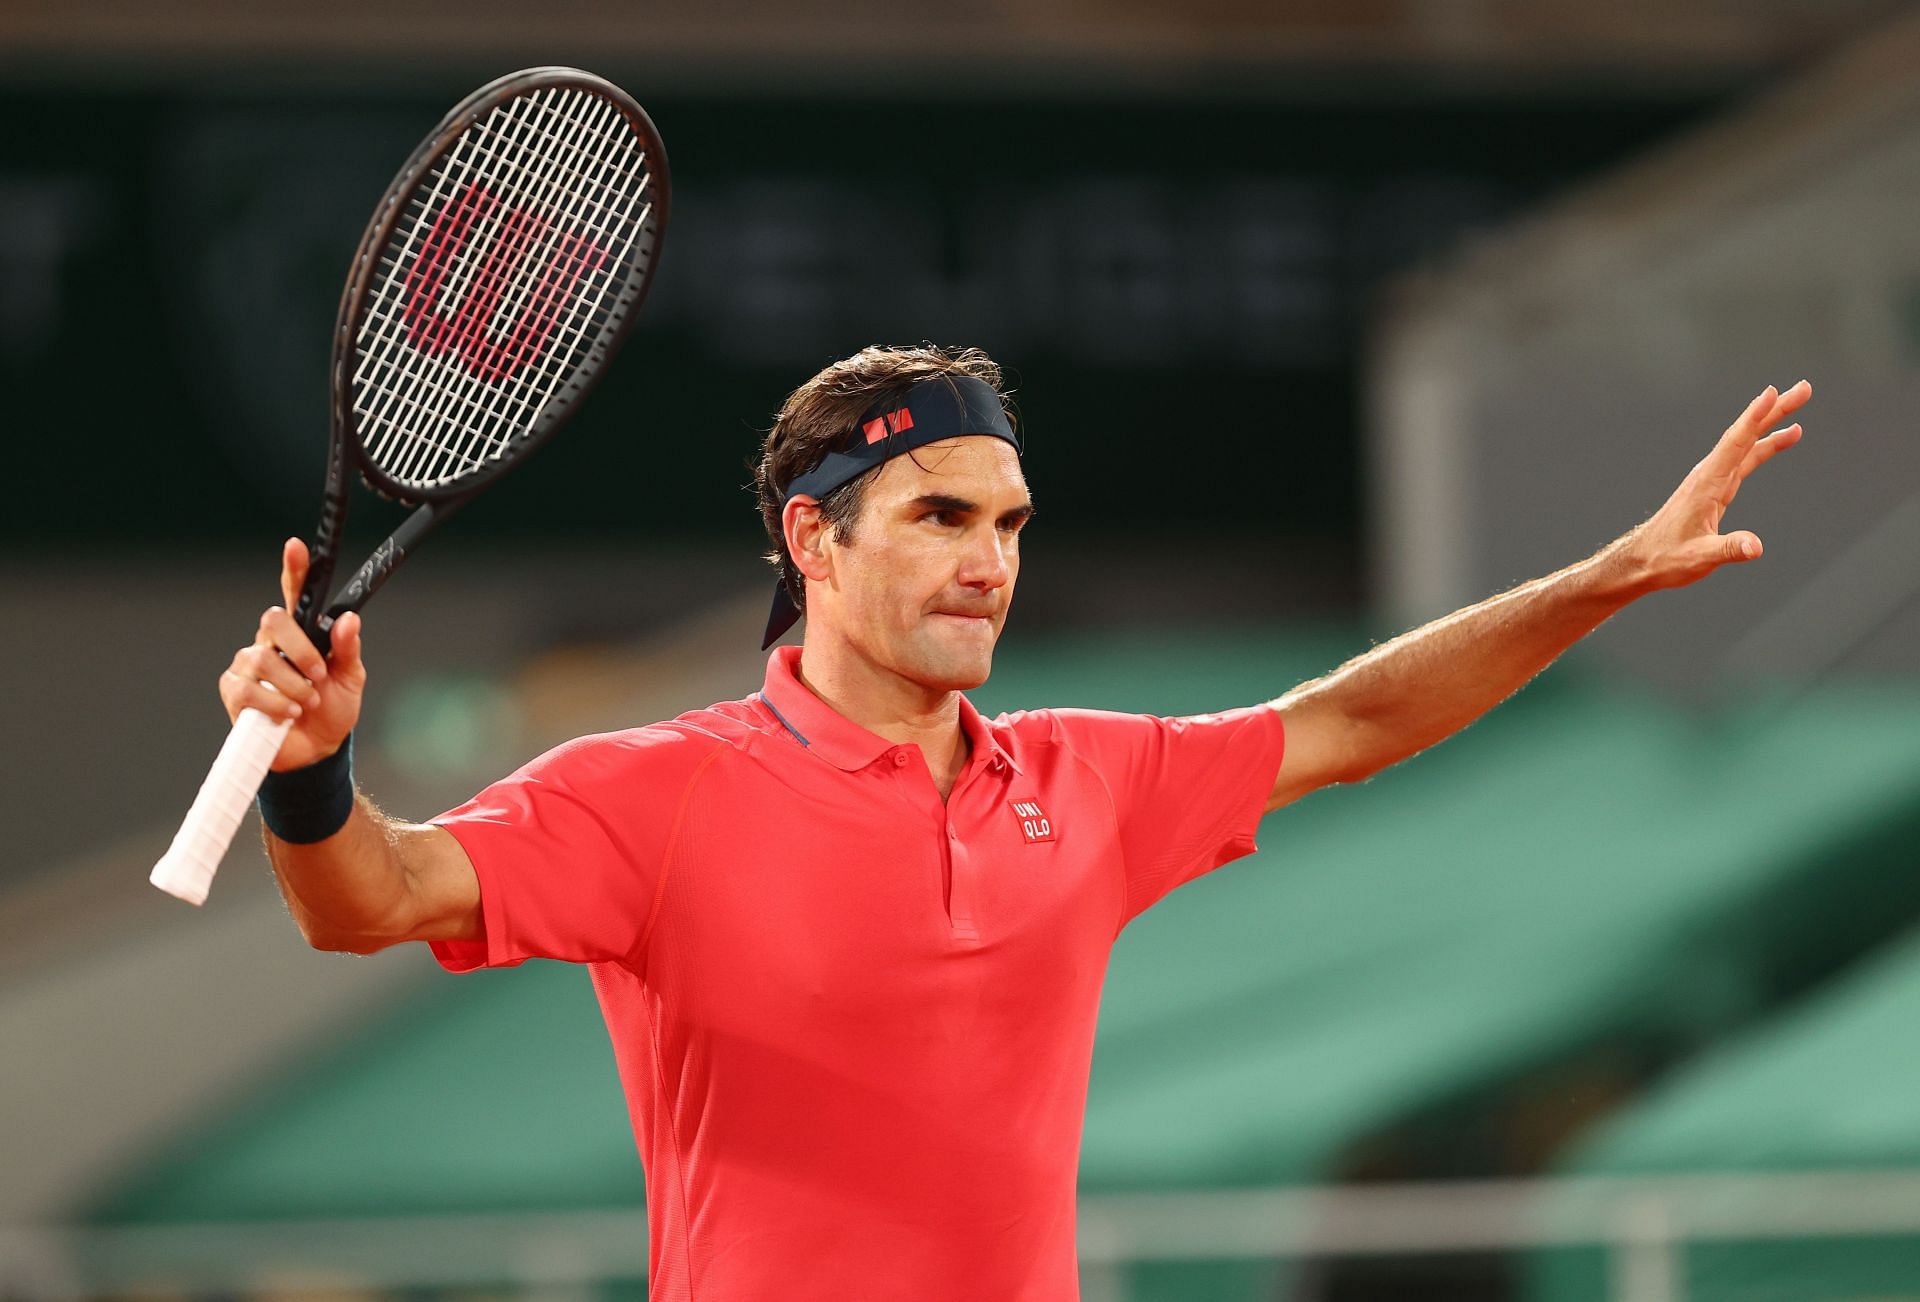 Roger Federer withdrew from his match against Matteo Berrettini at the 2021 French Open